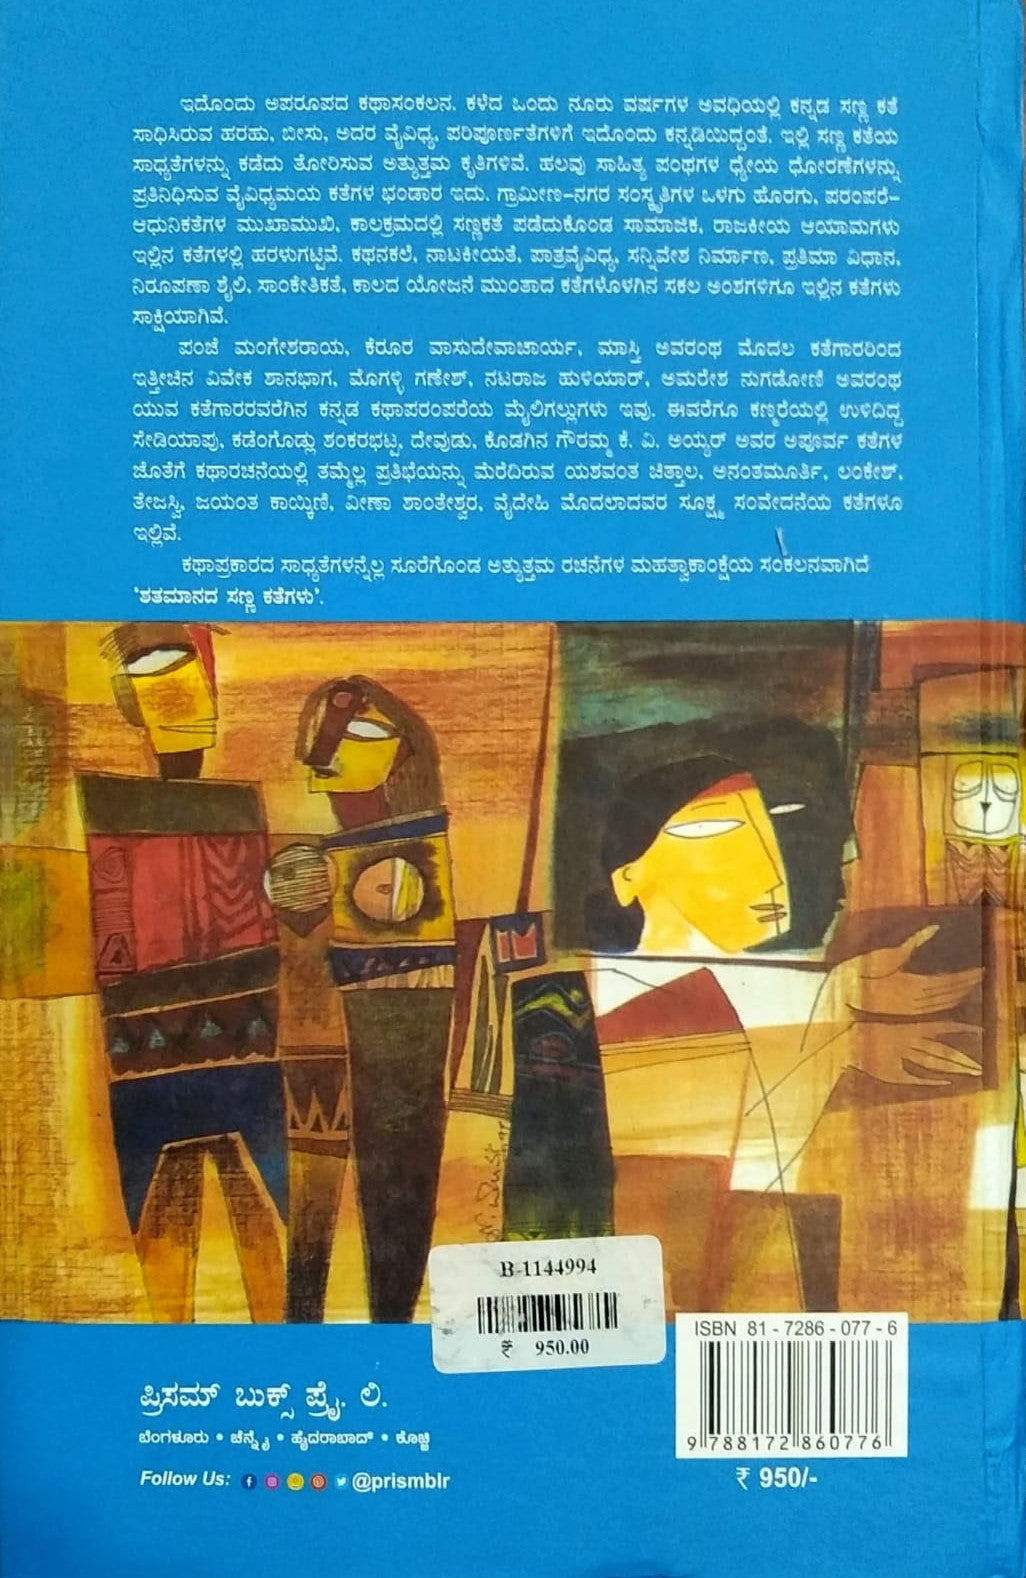 Shatamanada Sanna Kategalu Compiled by S. Diwakar and Published by Prism Books and it is a Collection of Stories over the Last Century